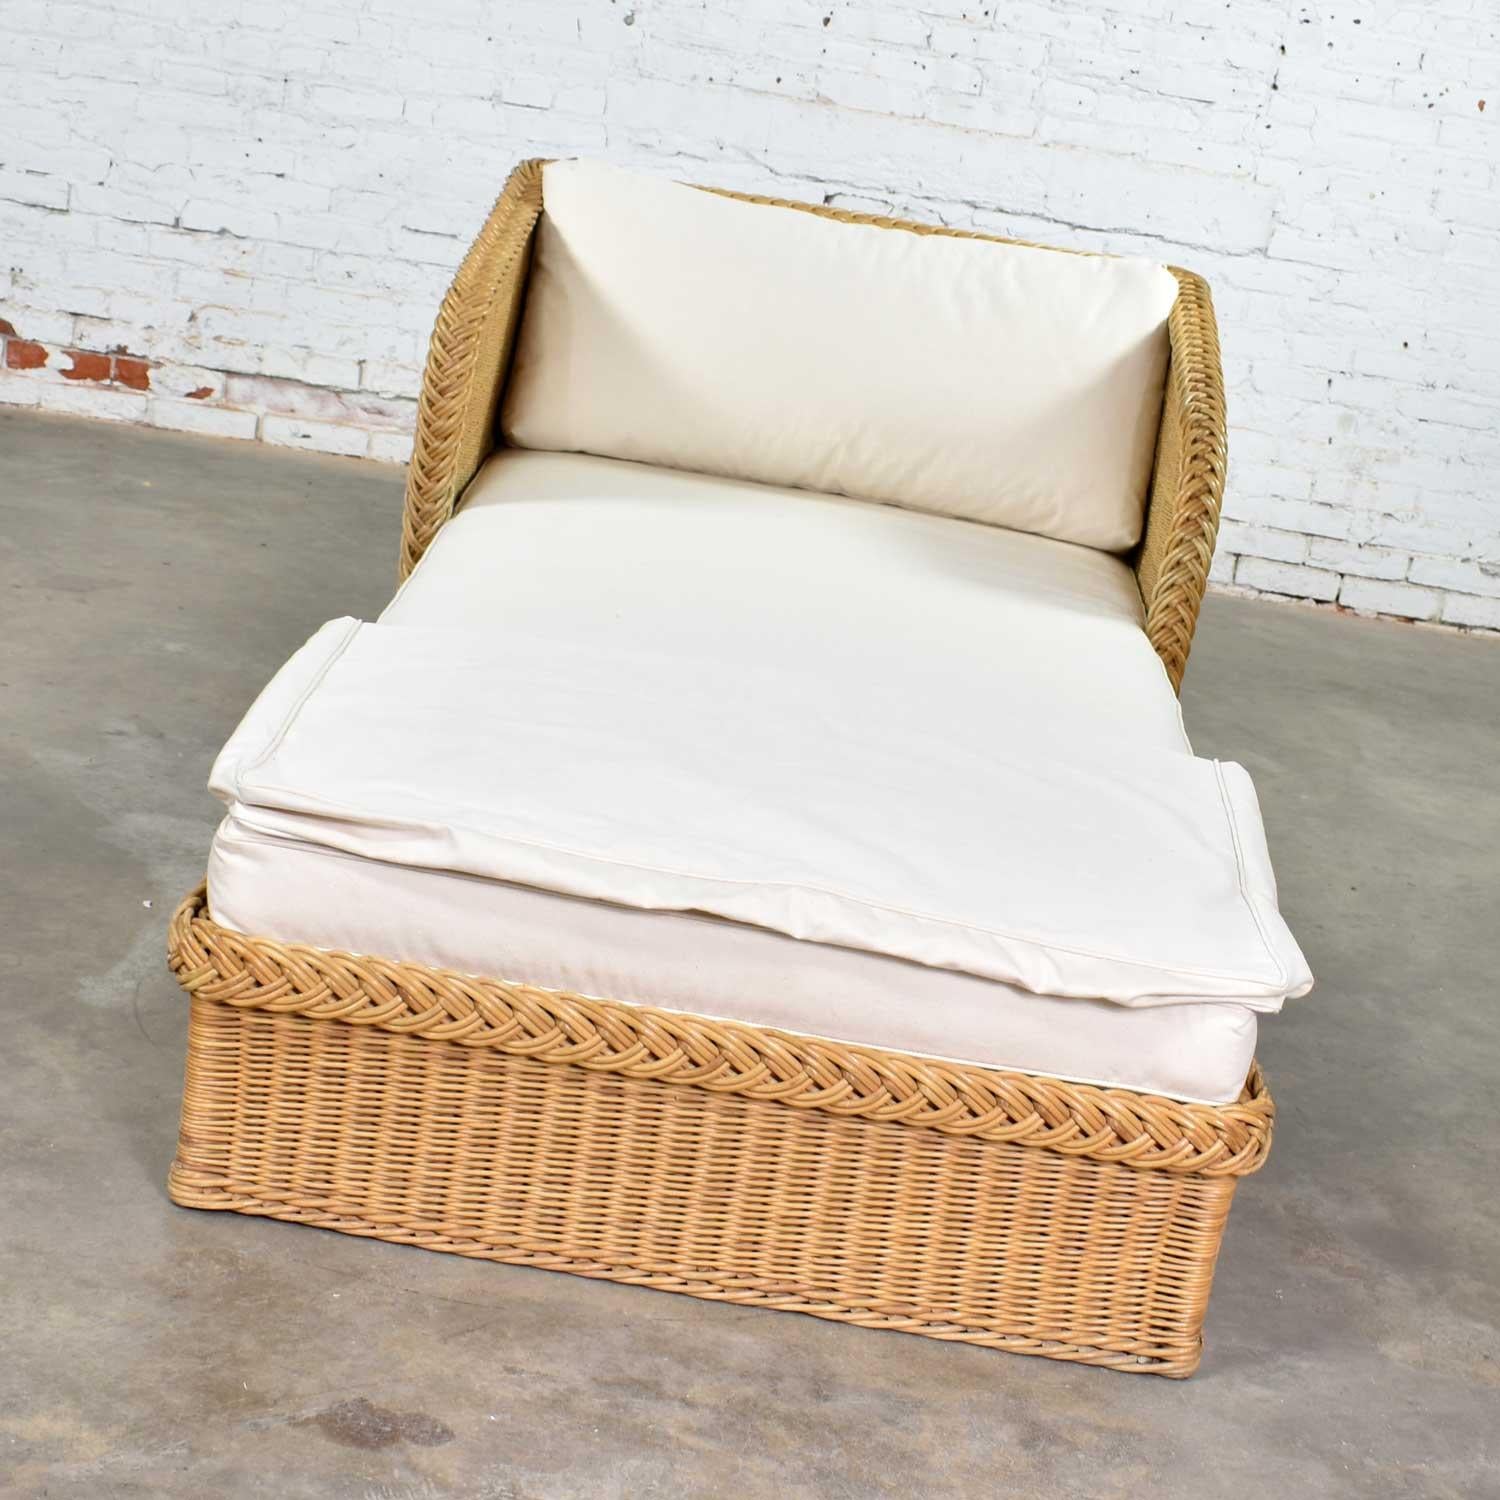 Wide Rattan Wicker Chaise by Bielecky Brothers, Inc. New White Canvas Upholstery 3